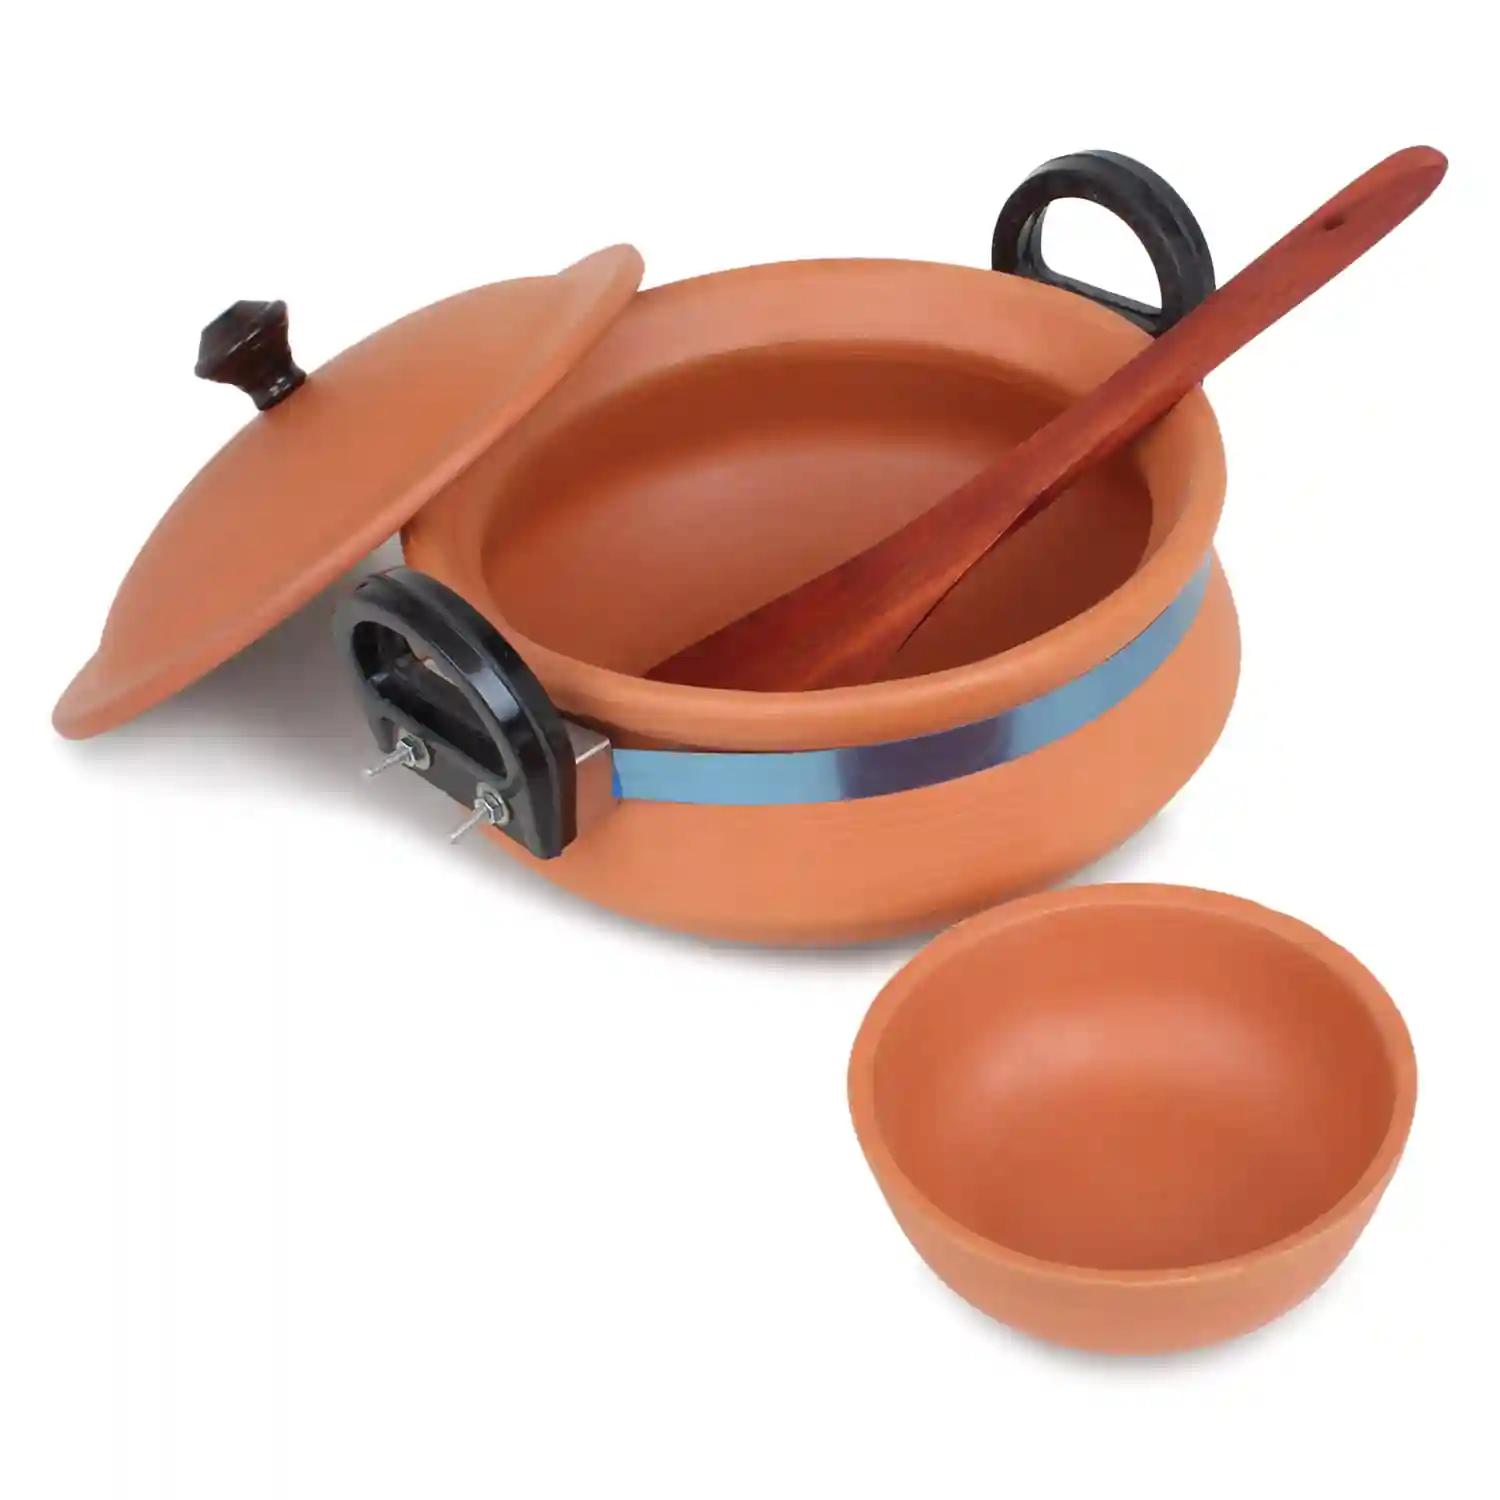 KSI Handi for Cooking and Serving with Lid Serving Bowl Wooden Spatula Combo Clay Pot Terracotta Handmade Mud Mitti Ke Bartan Pot Uncoated Pottery Storage Earthen India 2 Litre Lightweight & Durable